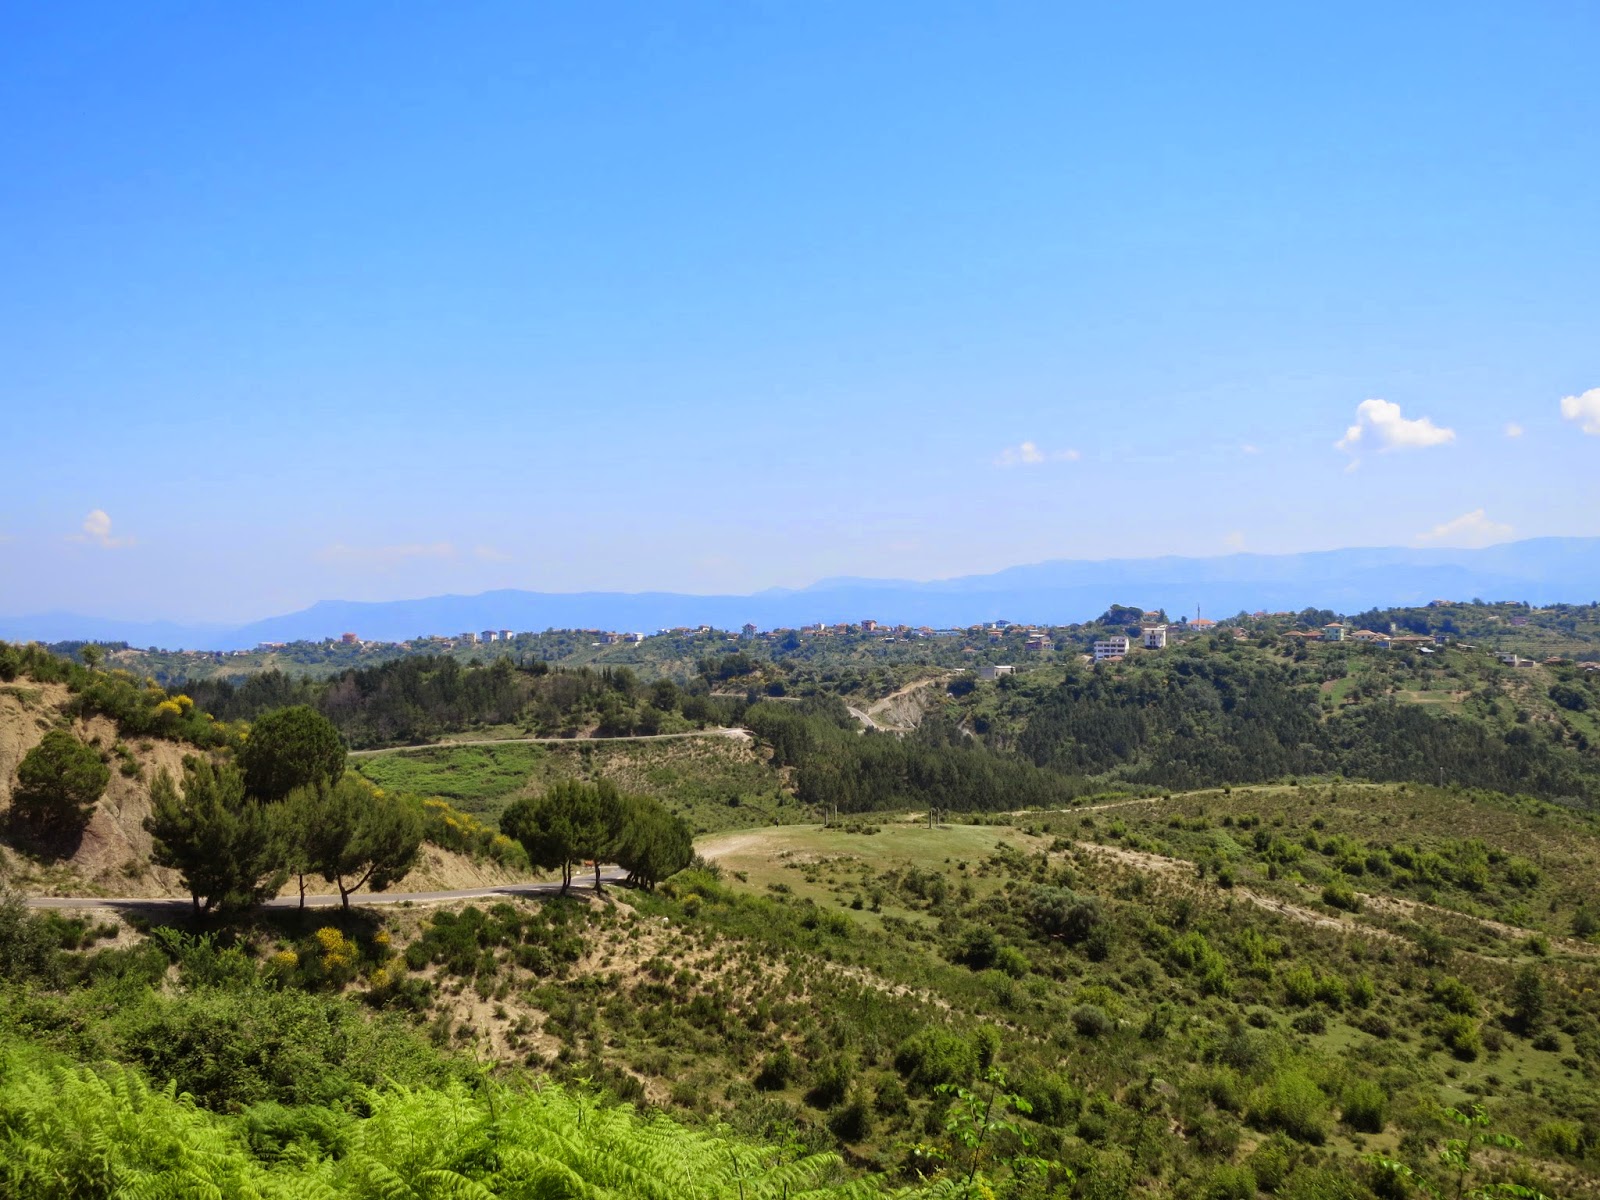 View of the Albanian countryside, taken near the town of Ishem